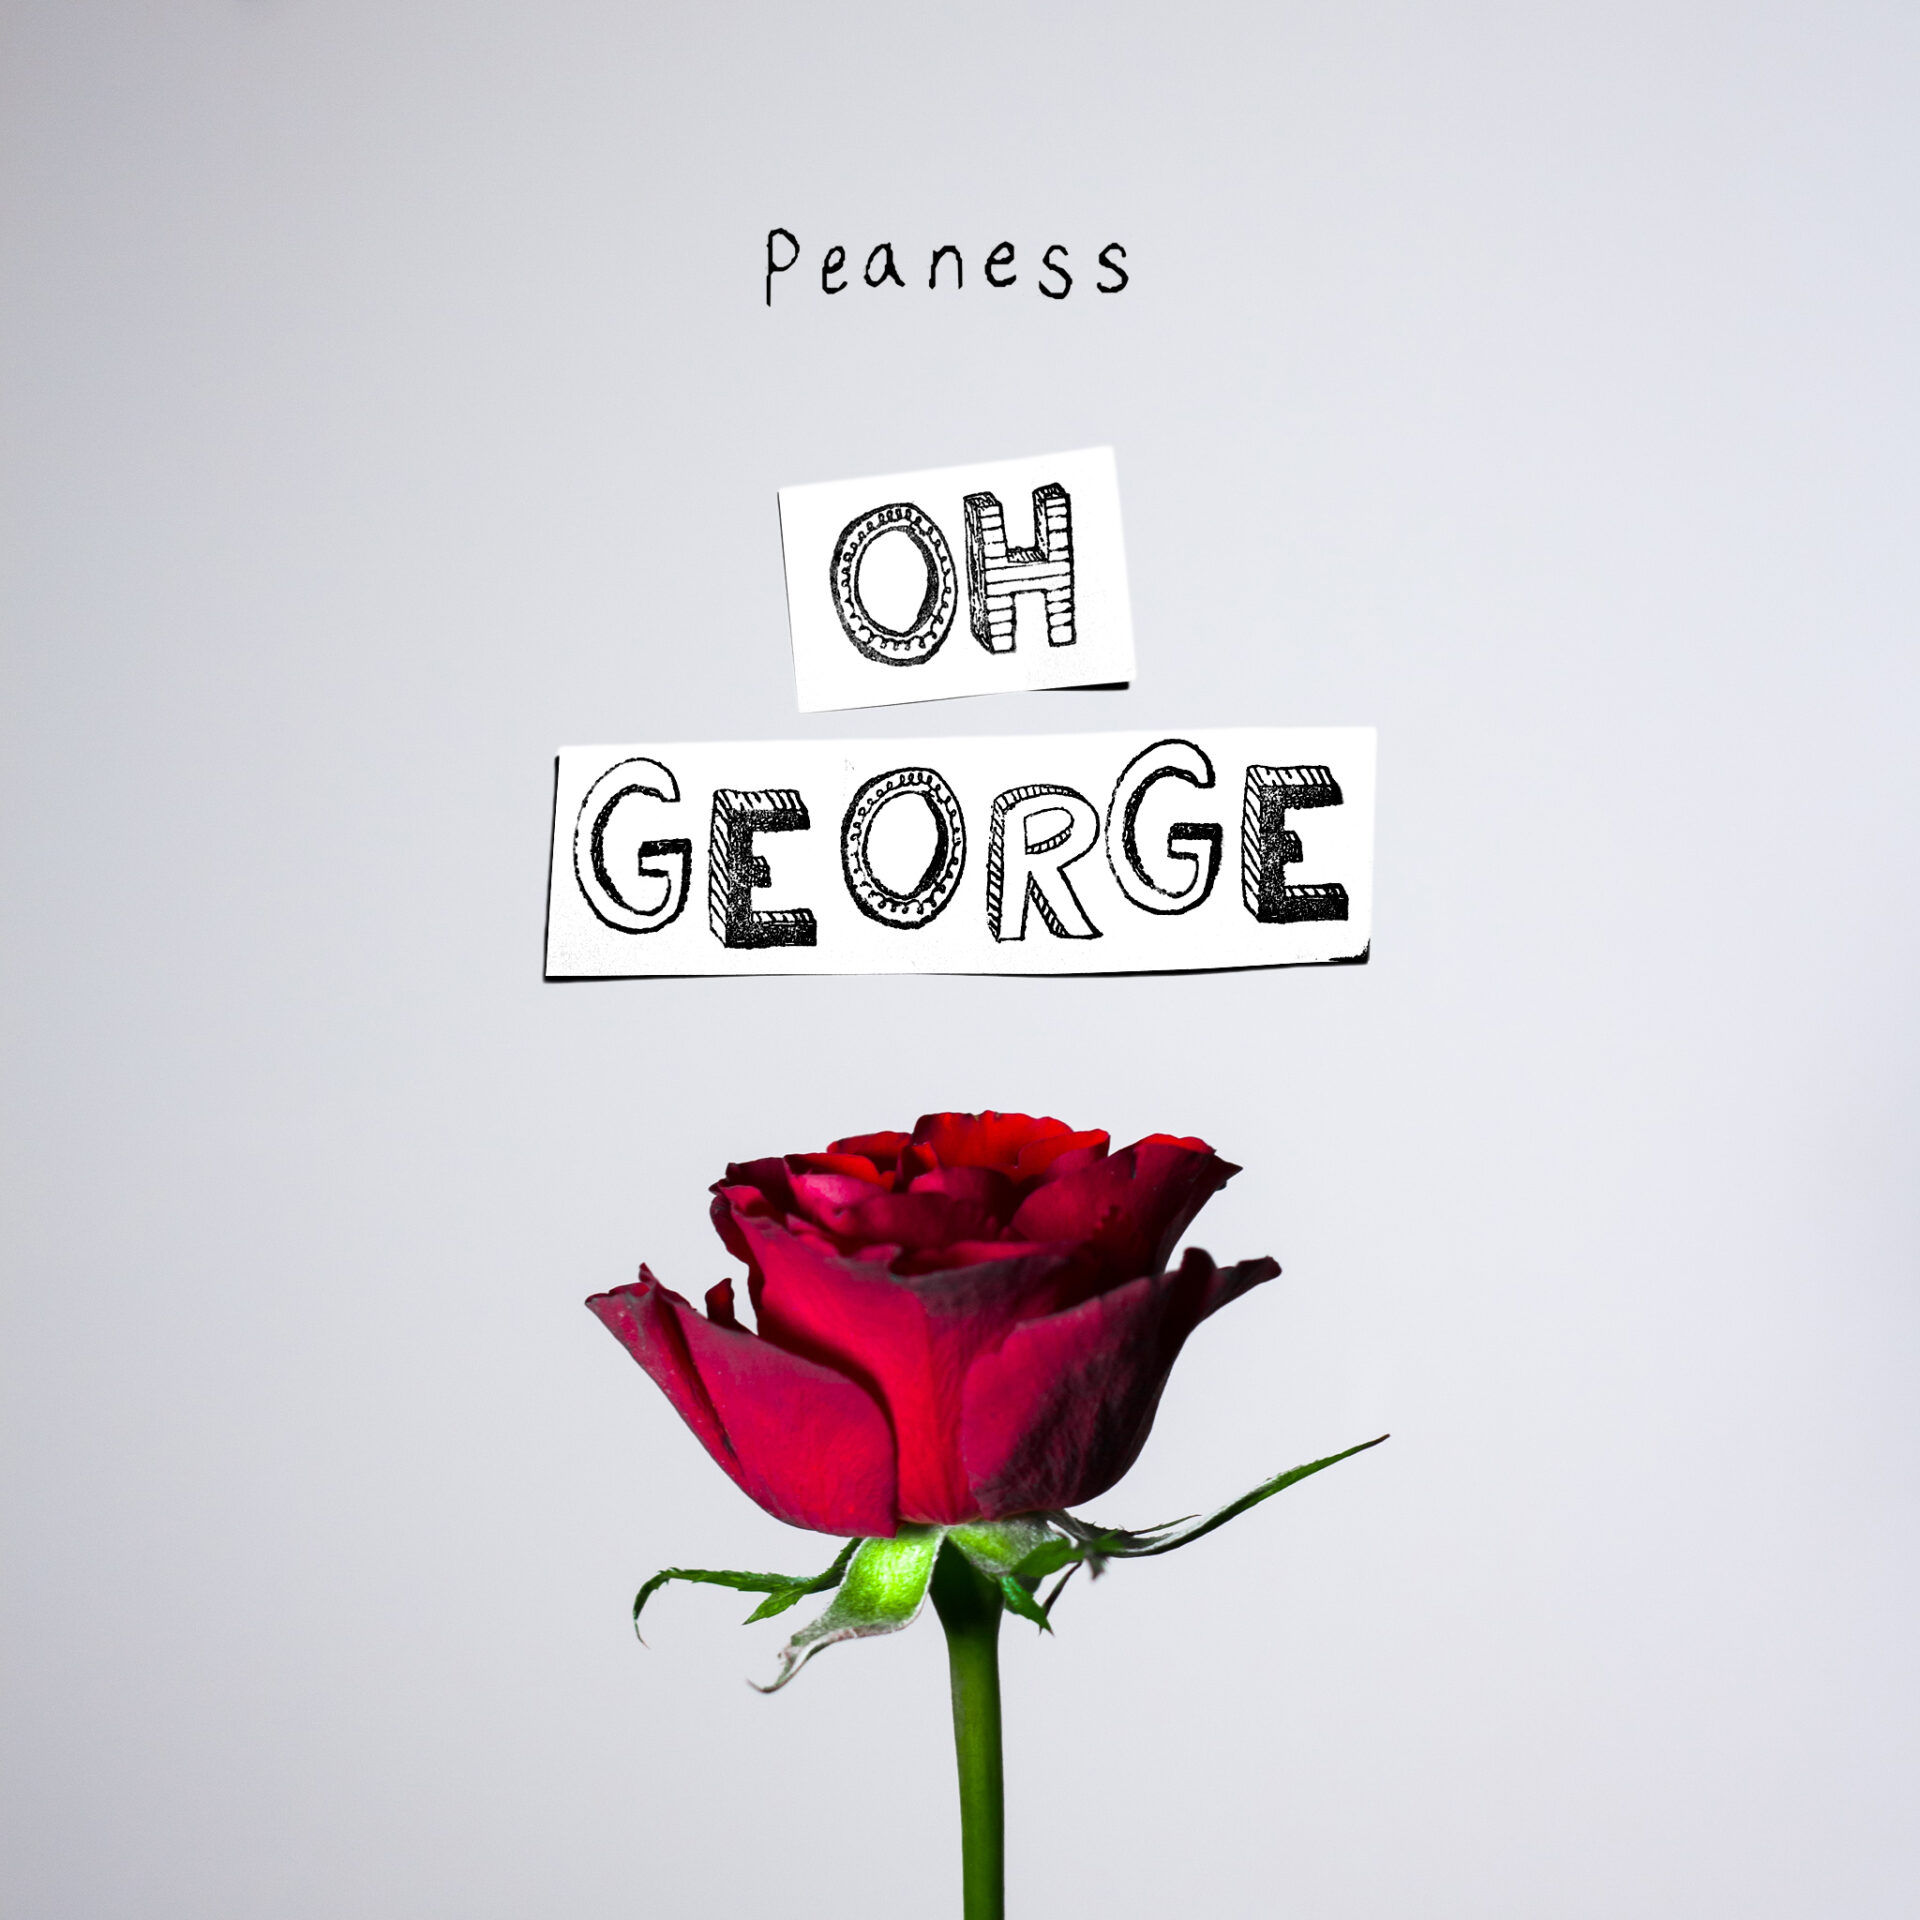 Track of the Day #829: Peaness - Oh George